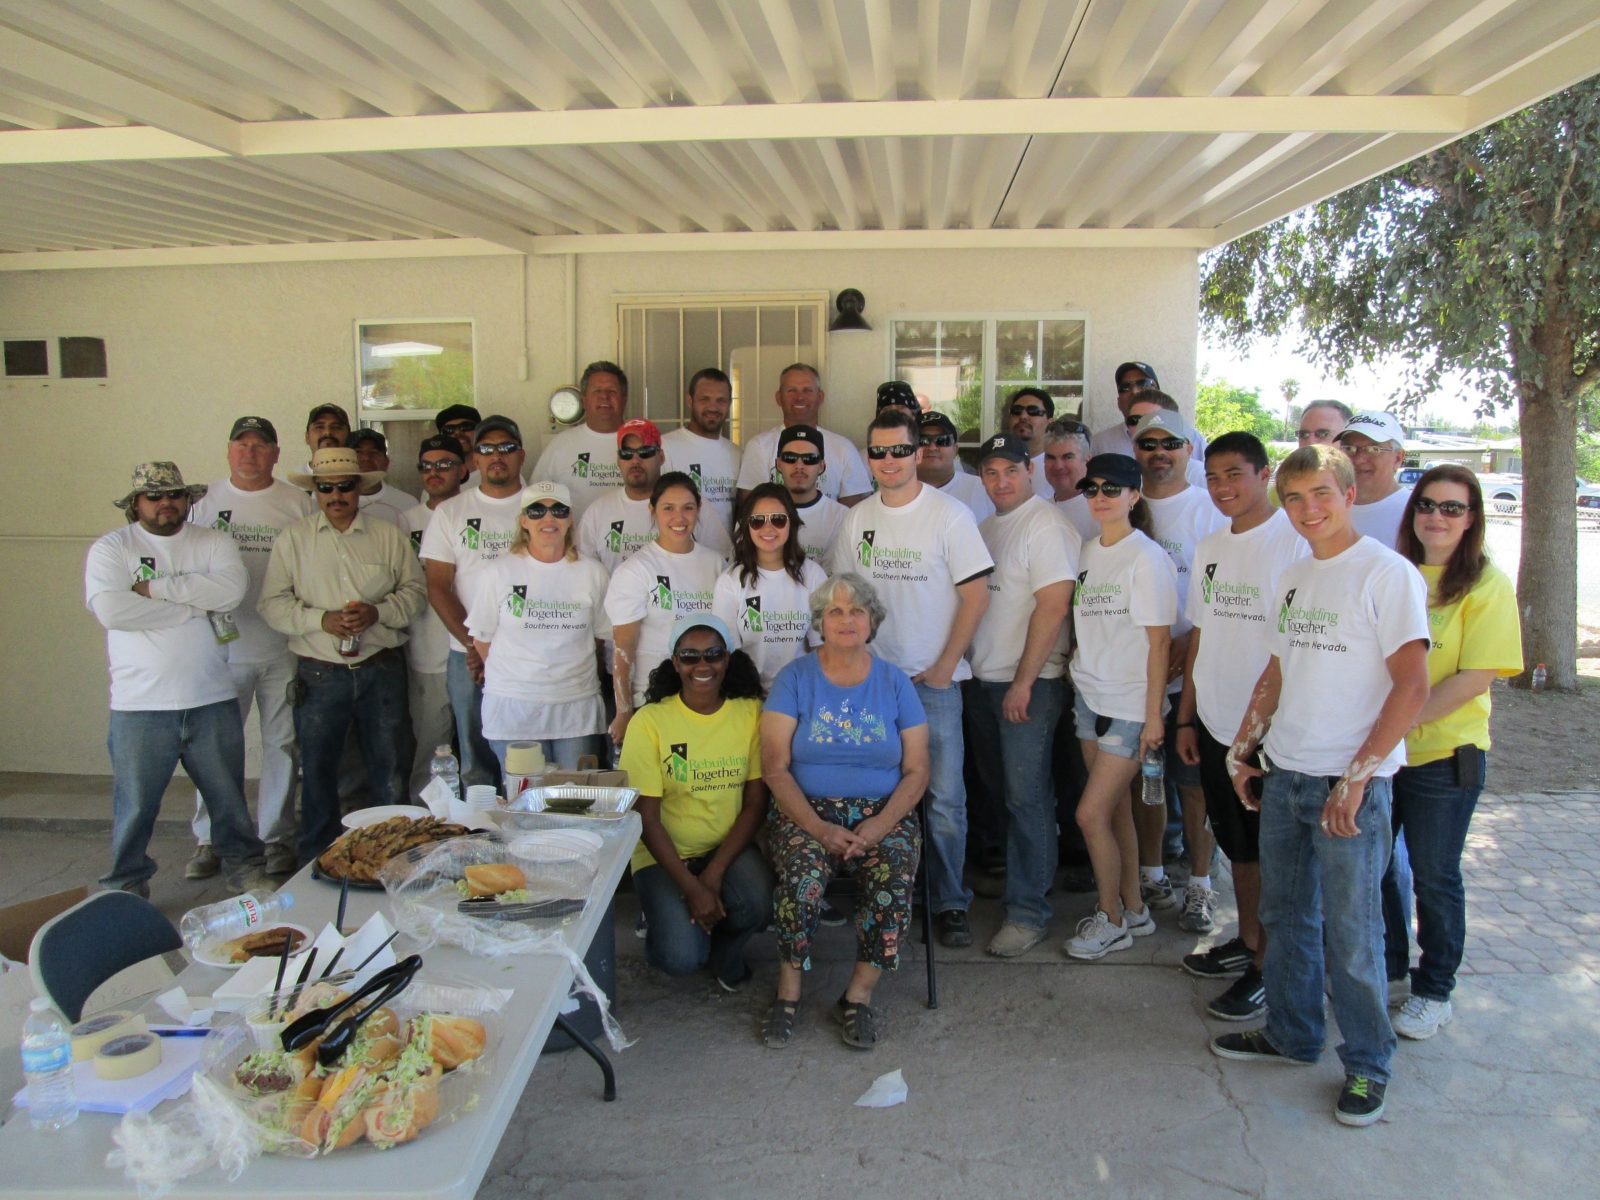 Raymond and Rebuilding Together